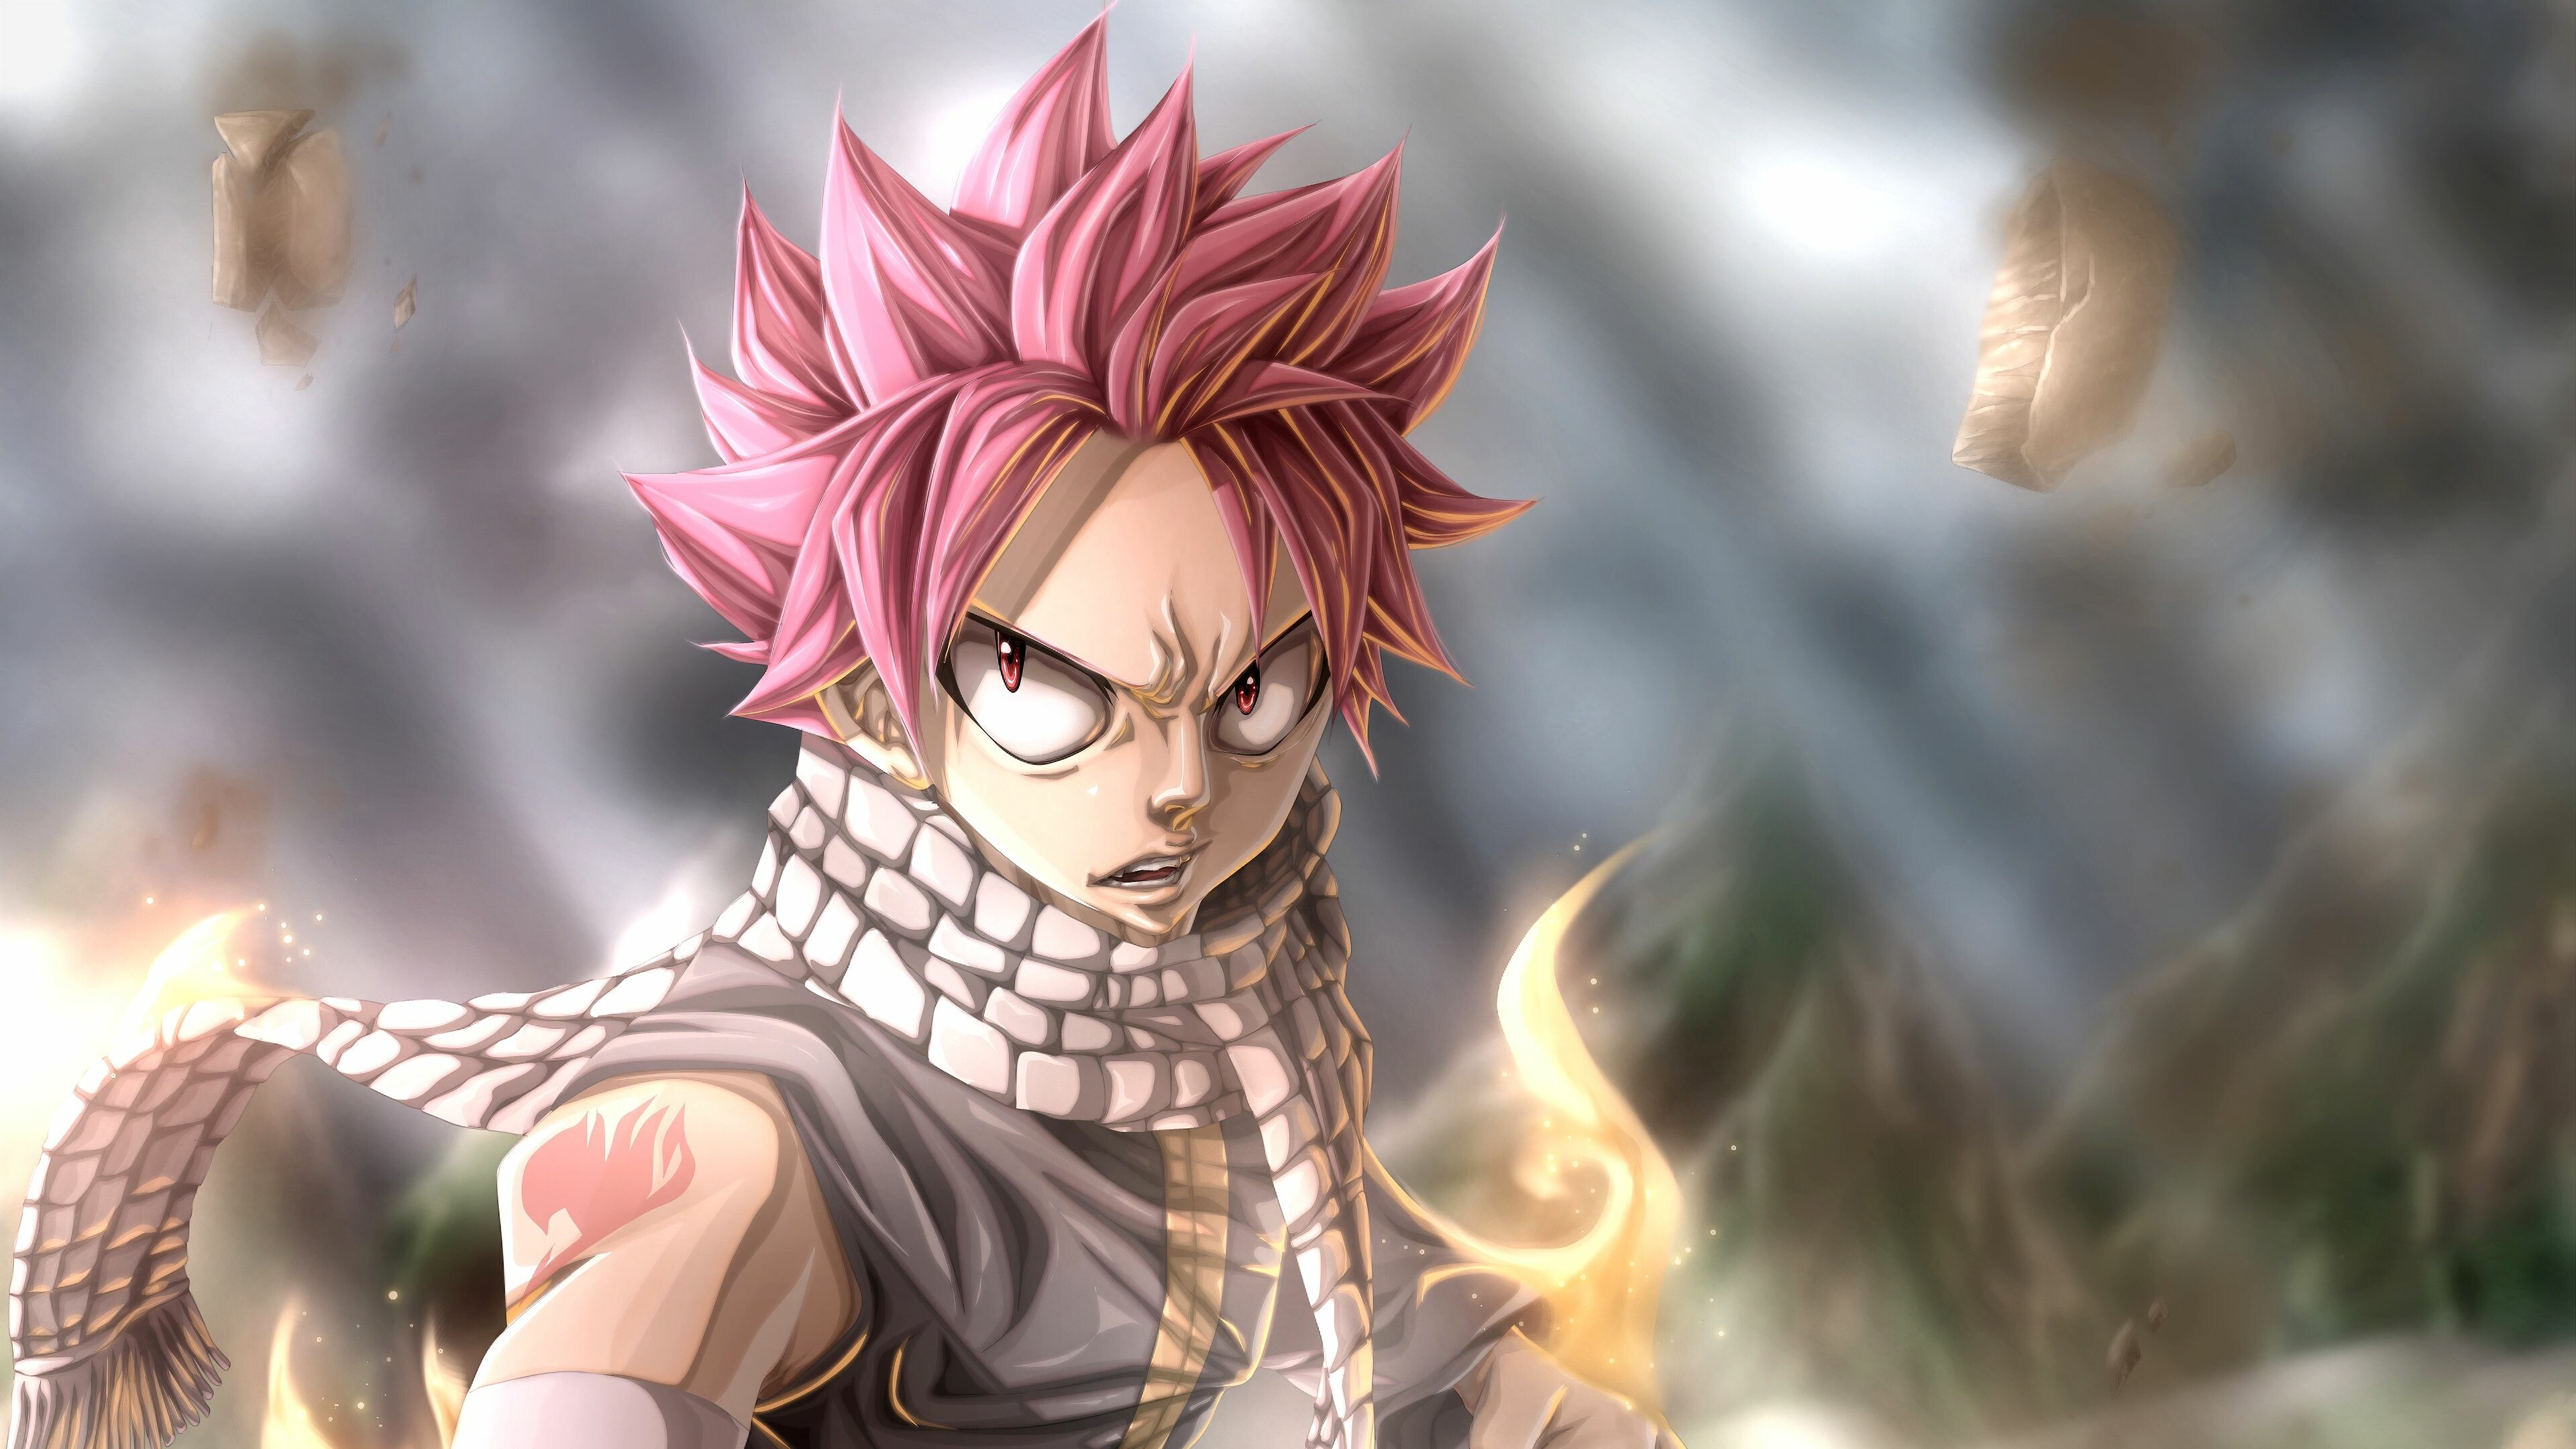 Fairy Tail: Natsu Dragneel, the younger brother of Zeref Dragneel, having originally died 400 years ago. 3840x2160 4K Wallpaper.